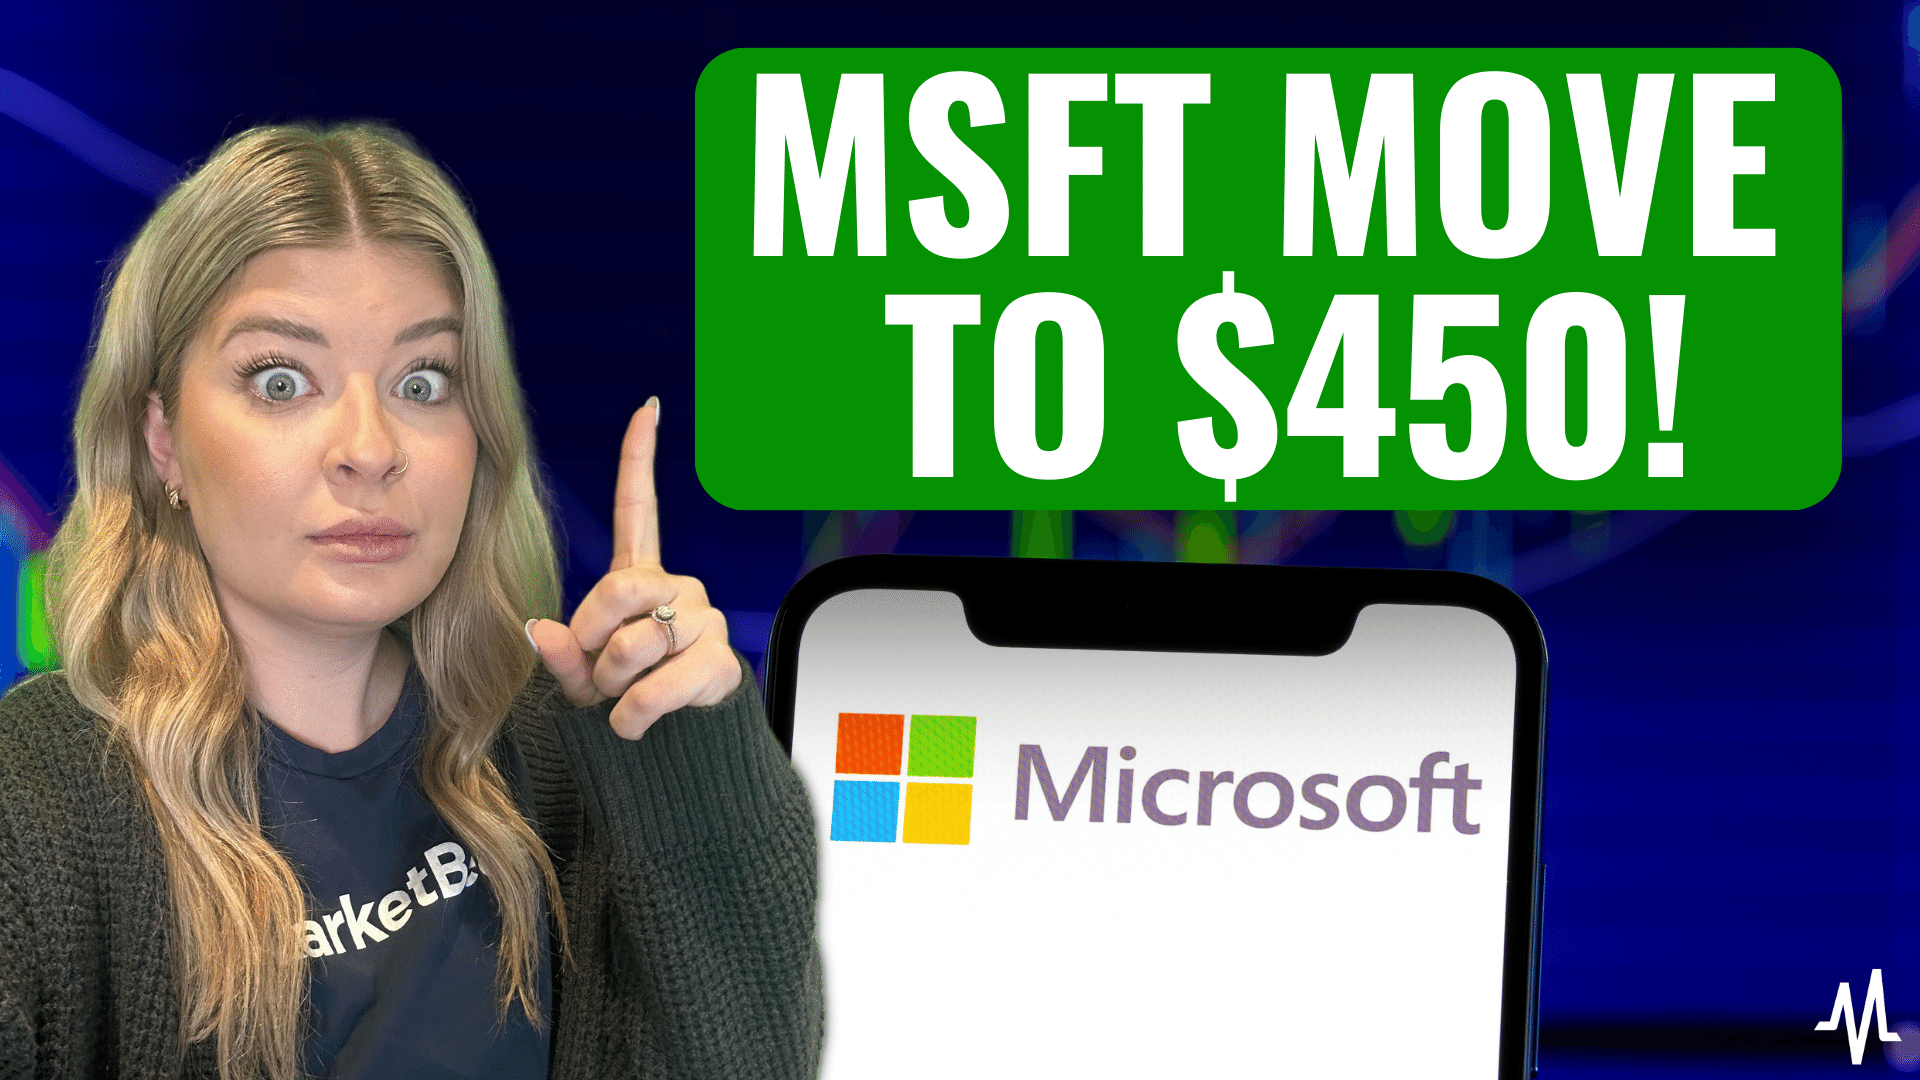 Microsoft Stock to $450? Here's How